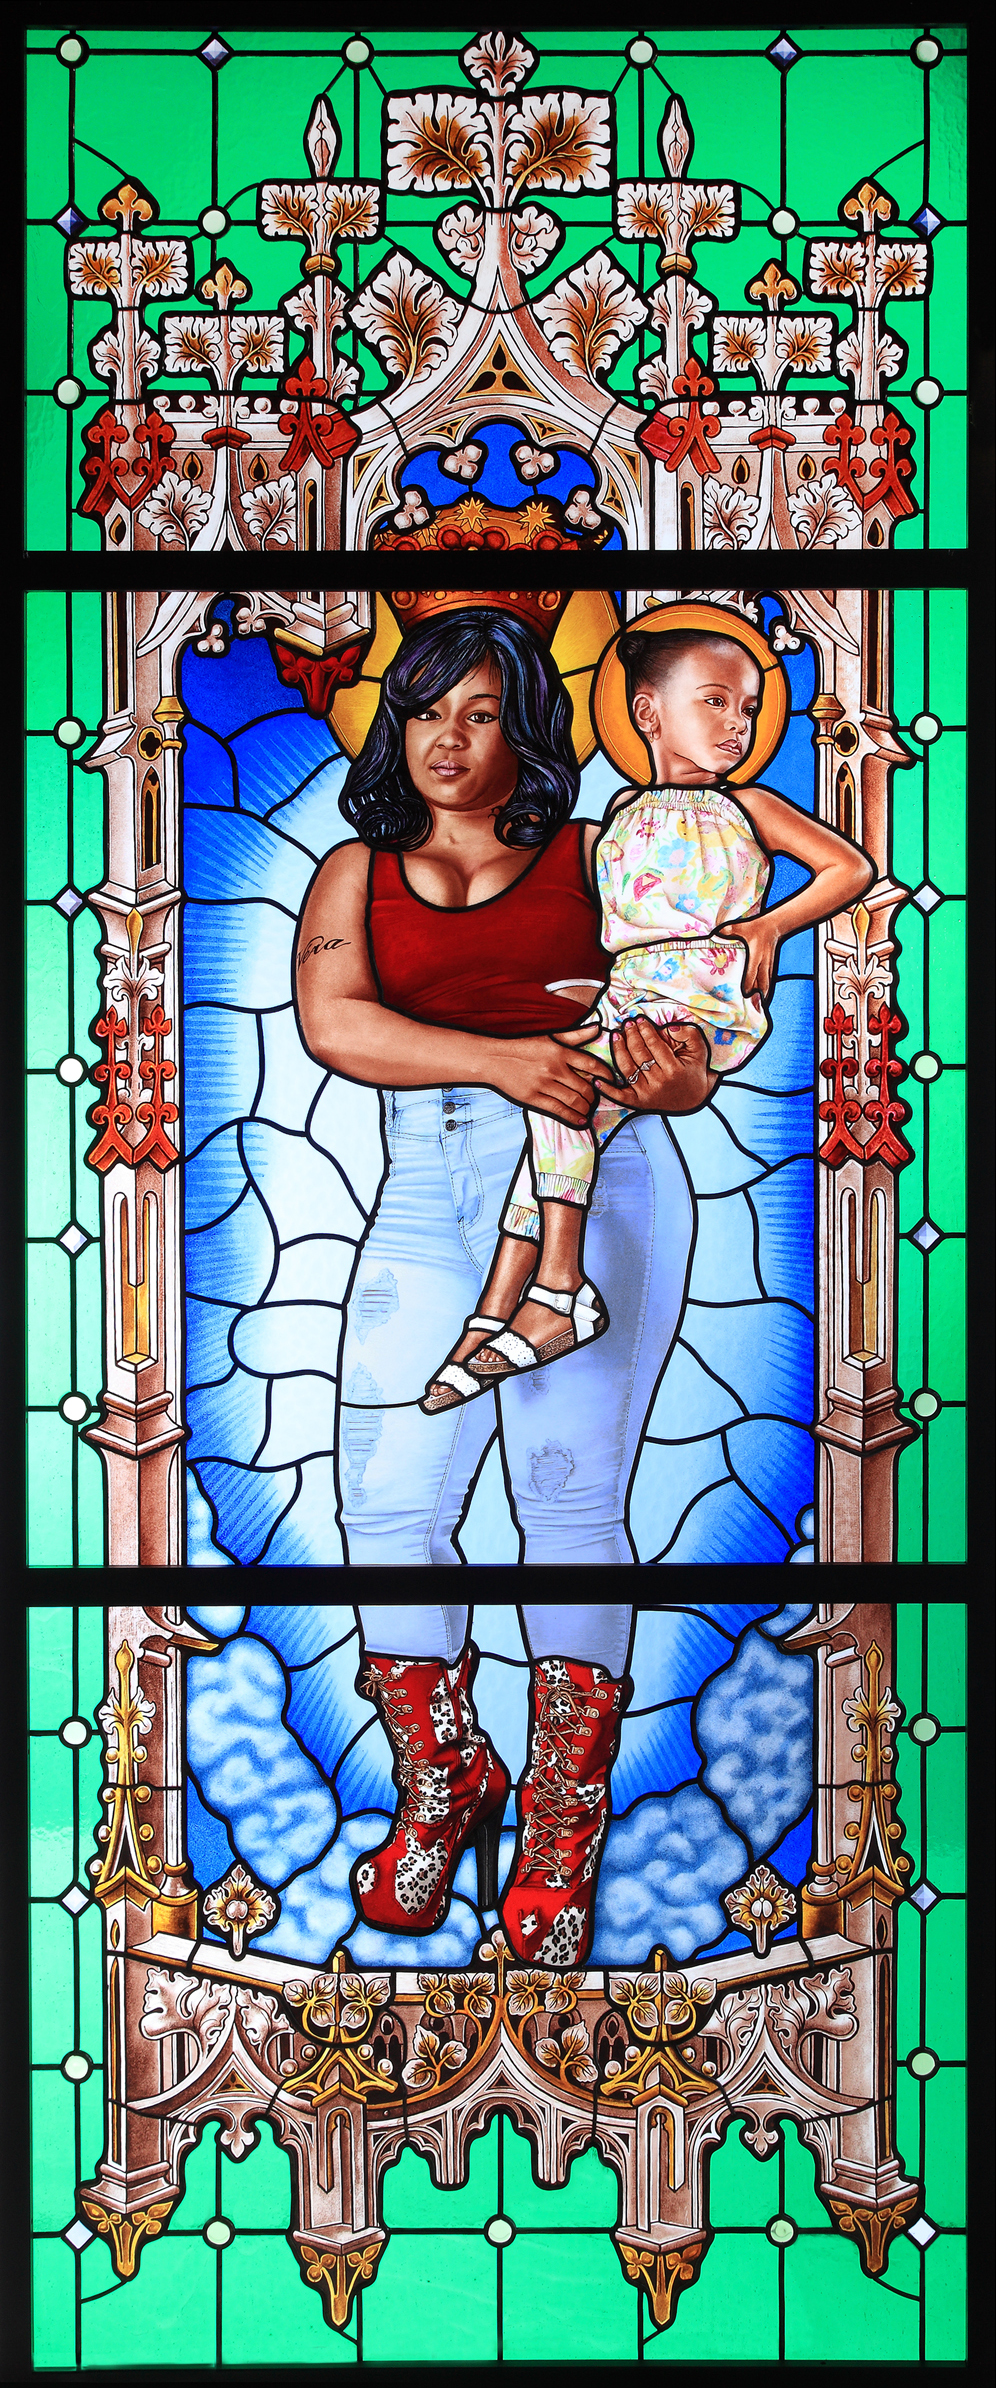 Kehinde Wiley | Lamentation, Le Petit Palais, Paris, France, October 20, 2016 - January 15, 2017 | St. Mary, 2016 Stained Glass in an Aluminum Frame. | 11